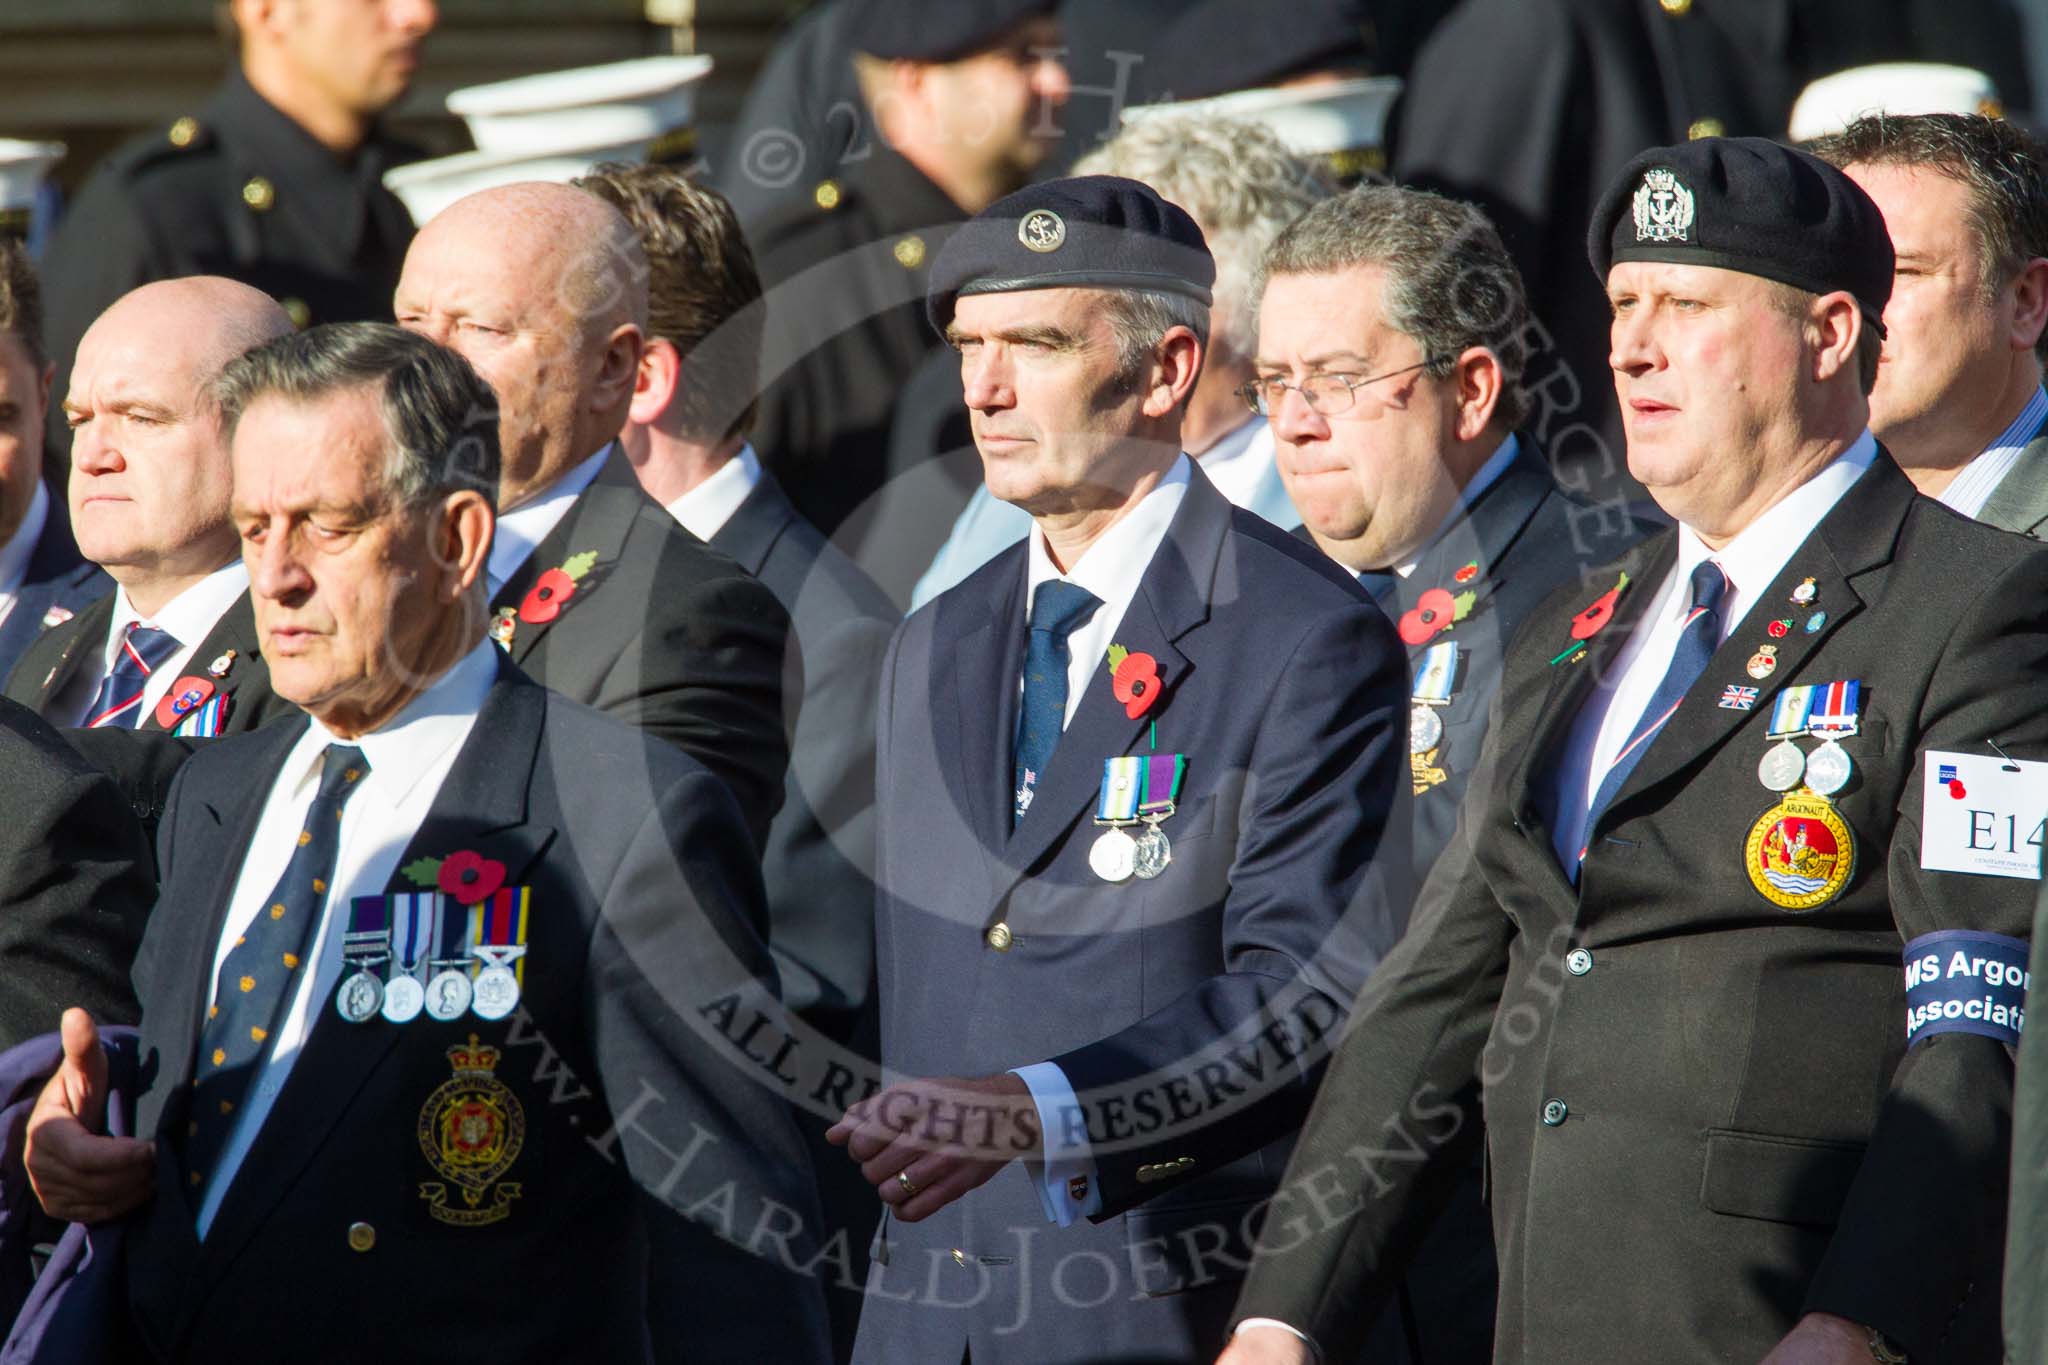 Remembrance Sunday at the Cenotaph in London 2014: Group E13 - HMS Andromeda Association.
Press stand opposite the Foreign Office building, Whitehall, London SW1,
London,
Greater London,
United Kingdom,
on 09 November 2014 at 11:51, image #682